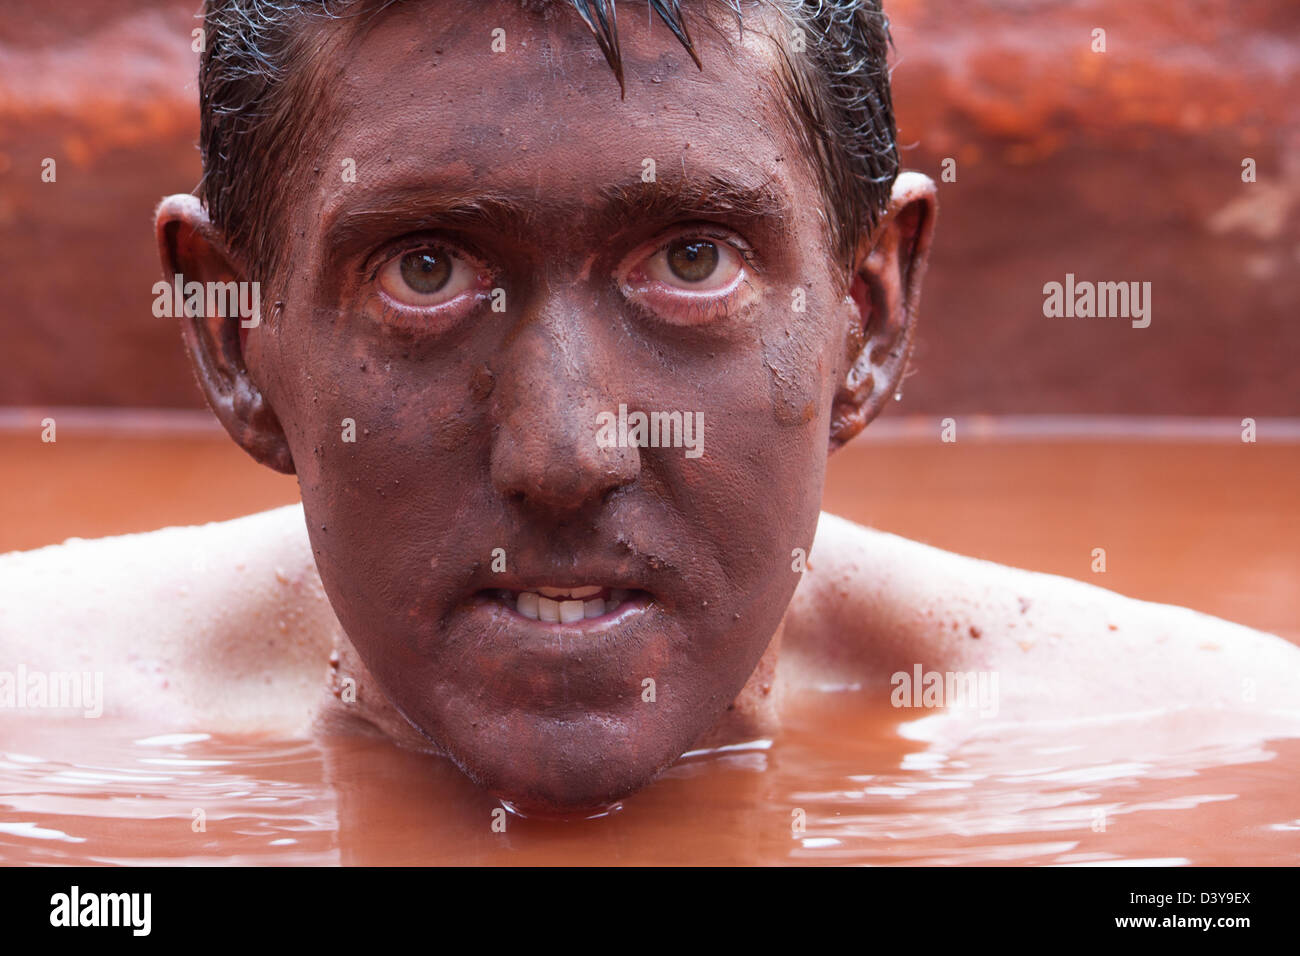 Close up of a man submerged in the red mud bath with his face completely covered in mud. Stock Photo